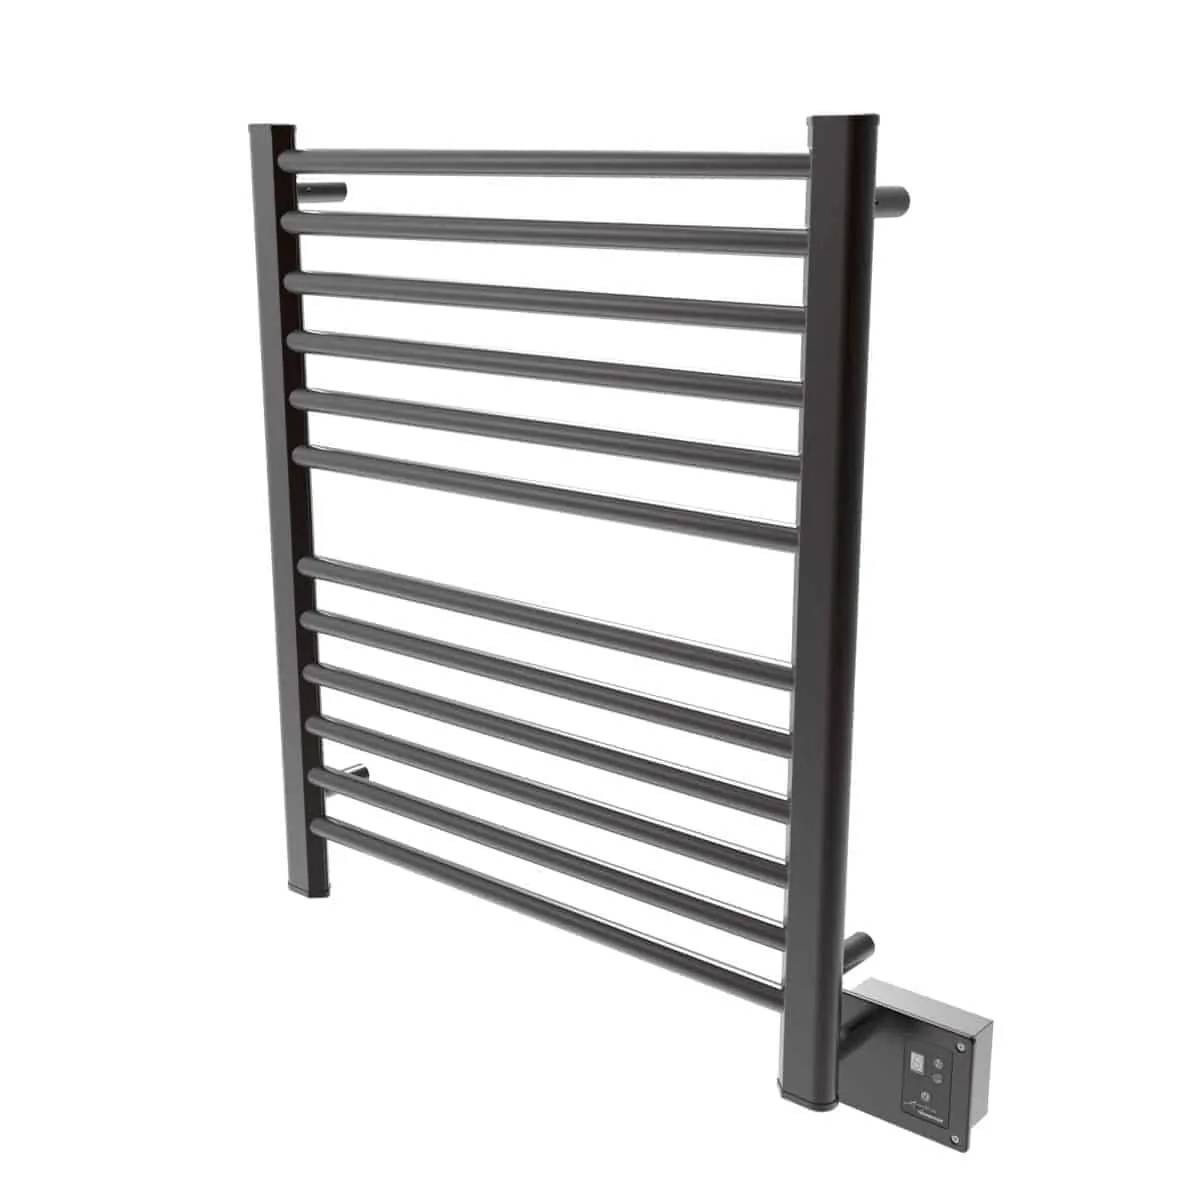 Amba S2933O Model 12 Bar Hardwired Towel Warmer - Oil Rubbed Bronze - Click Image to Close